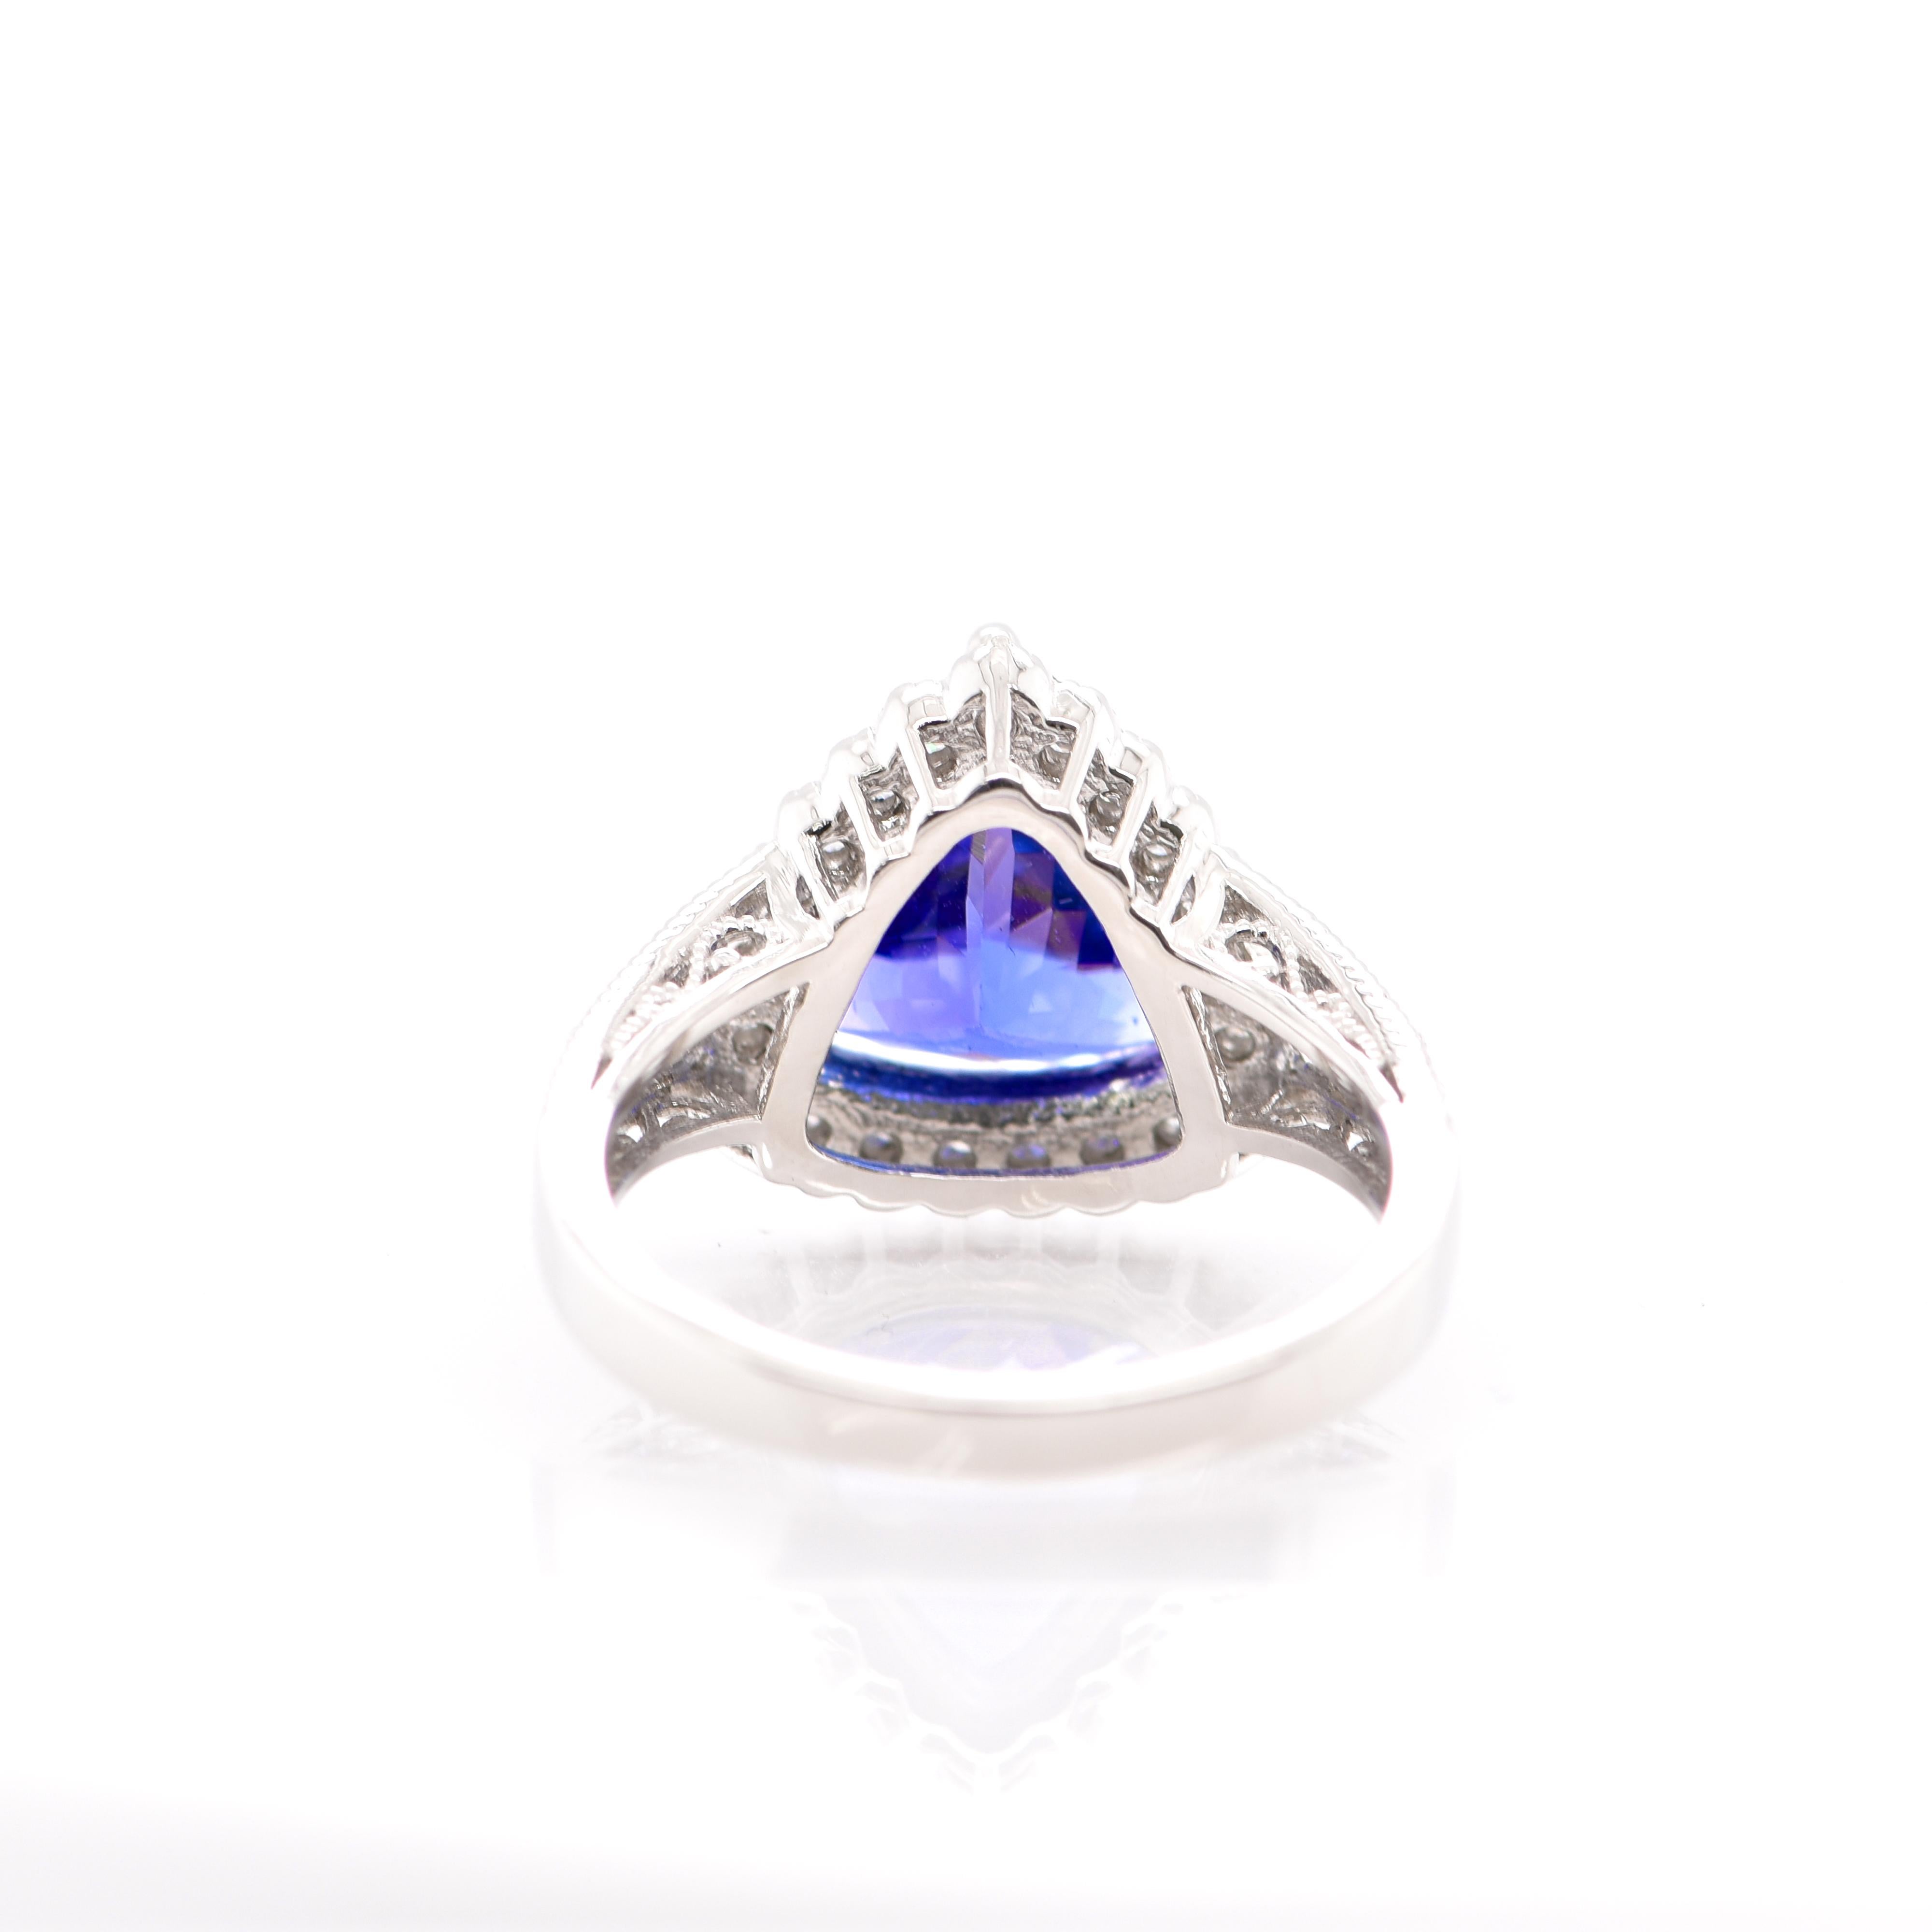 A beautiful Cocktail Ring featuring a 3.52 Carat Trillion Cut Tanzanite and 0.37 Carats of Diamond Accents set in Platinum. Tanzanite's name was given by Tiffany and Co after its only known source: Tanzania. Tanzanite displays beautiful pleochroic